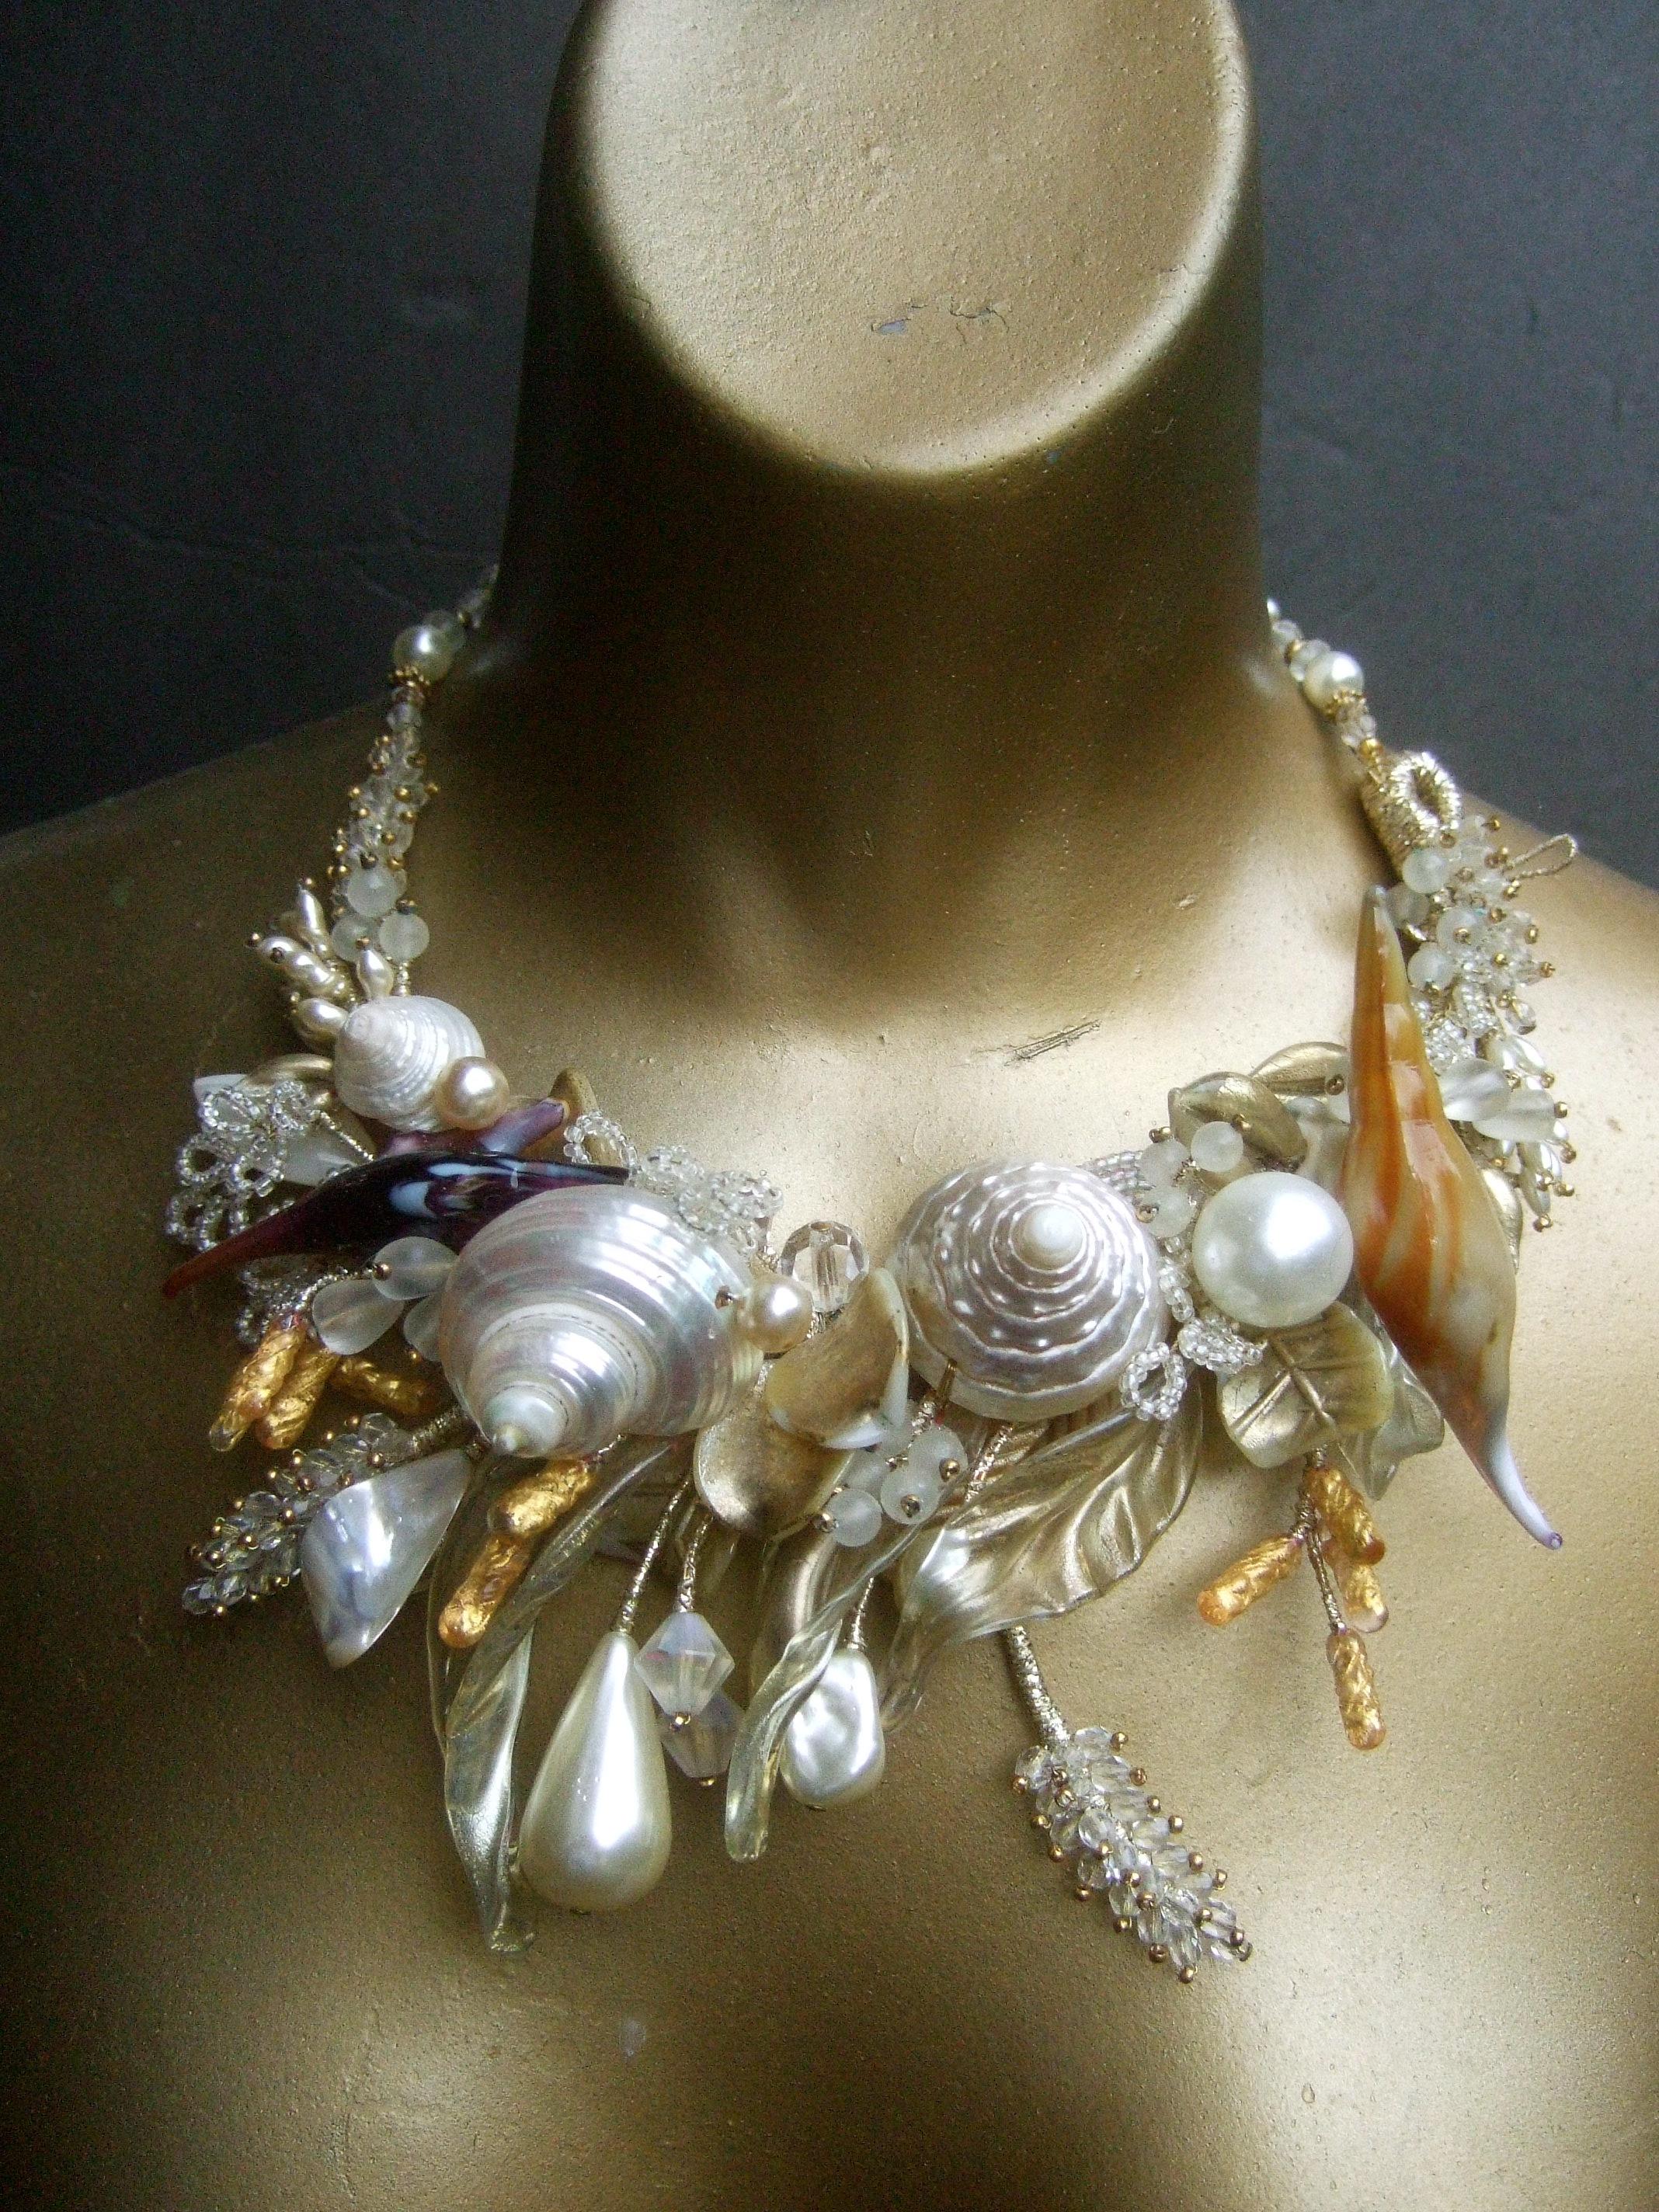 Seashell handmade artisan choker band necklace c 1980s
The exquisite artisan choker is encrusted with a variety of seashells
Combined with faux resin enamel pearls & lucite beads & stalks 

The collection of embellishments are wired onto a rigid